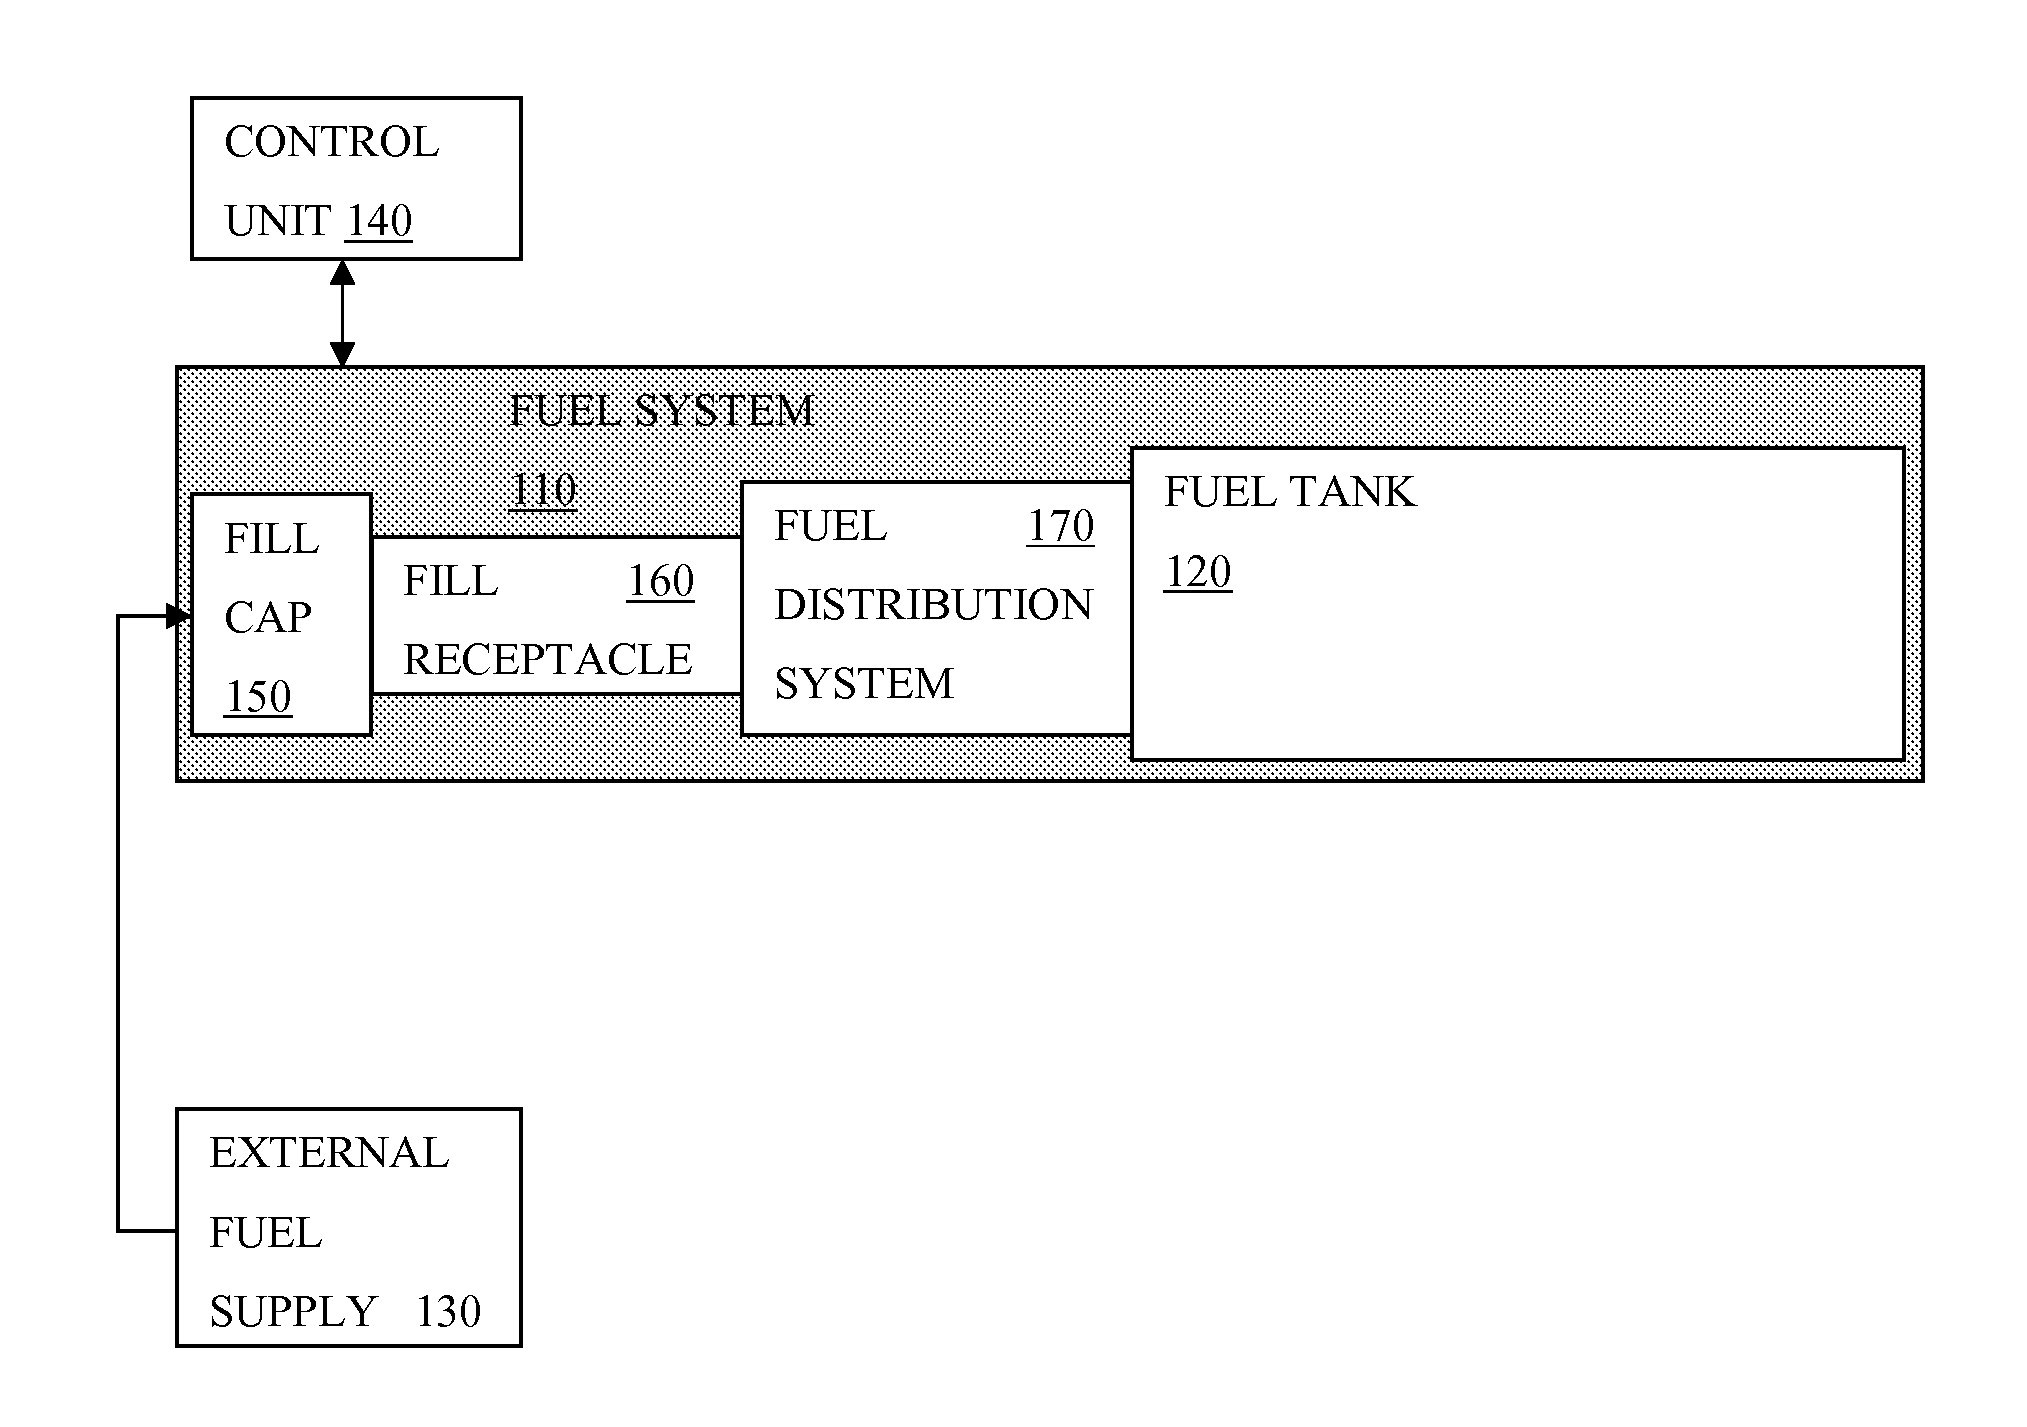 Systems and methods for regulating fuel systems